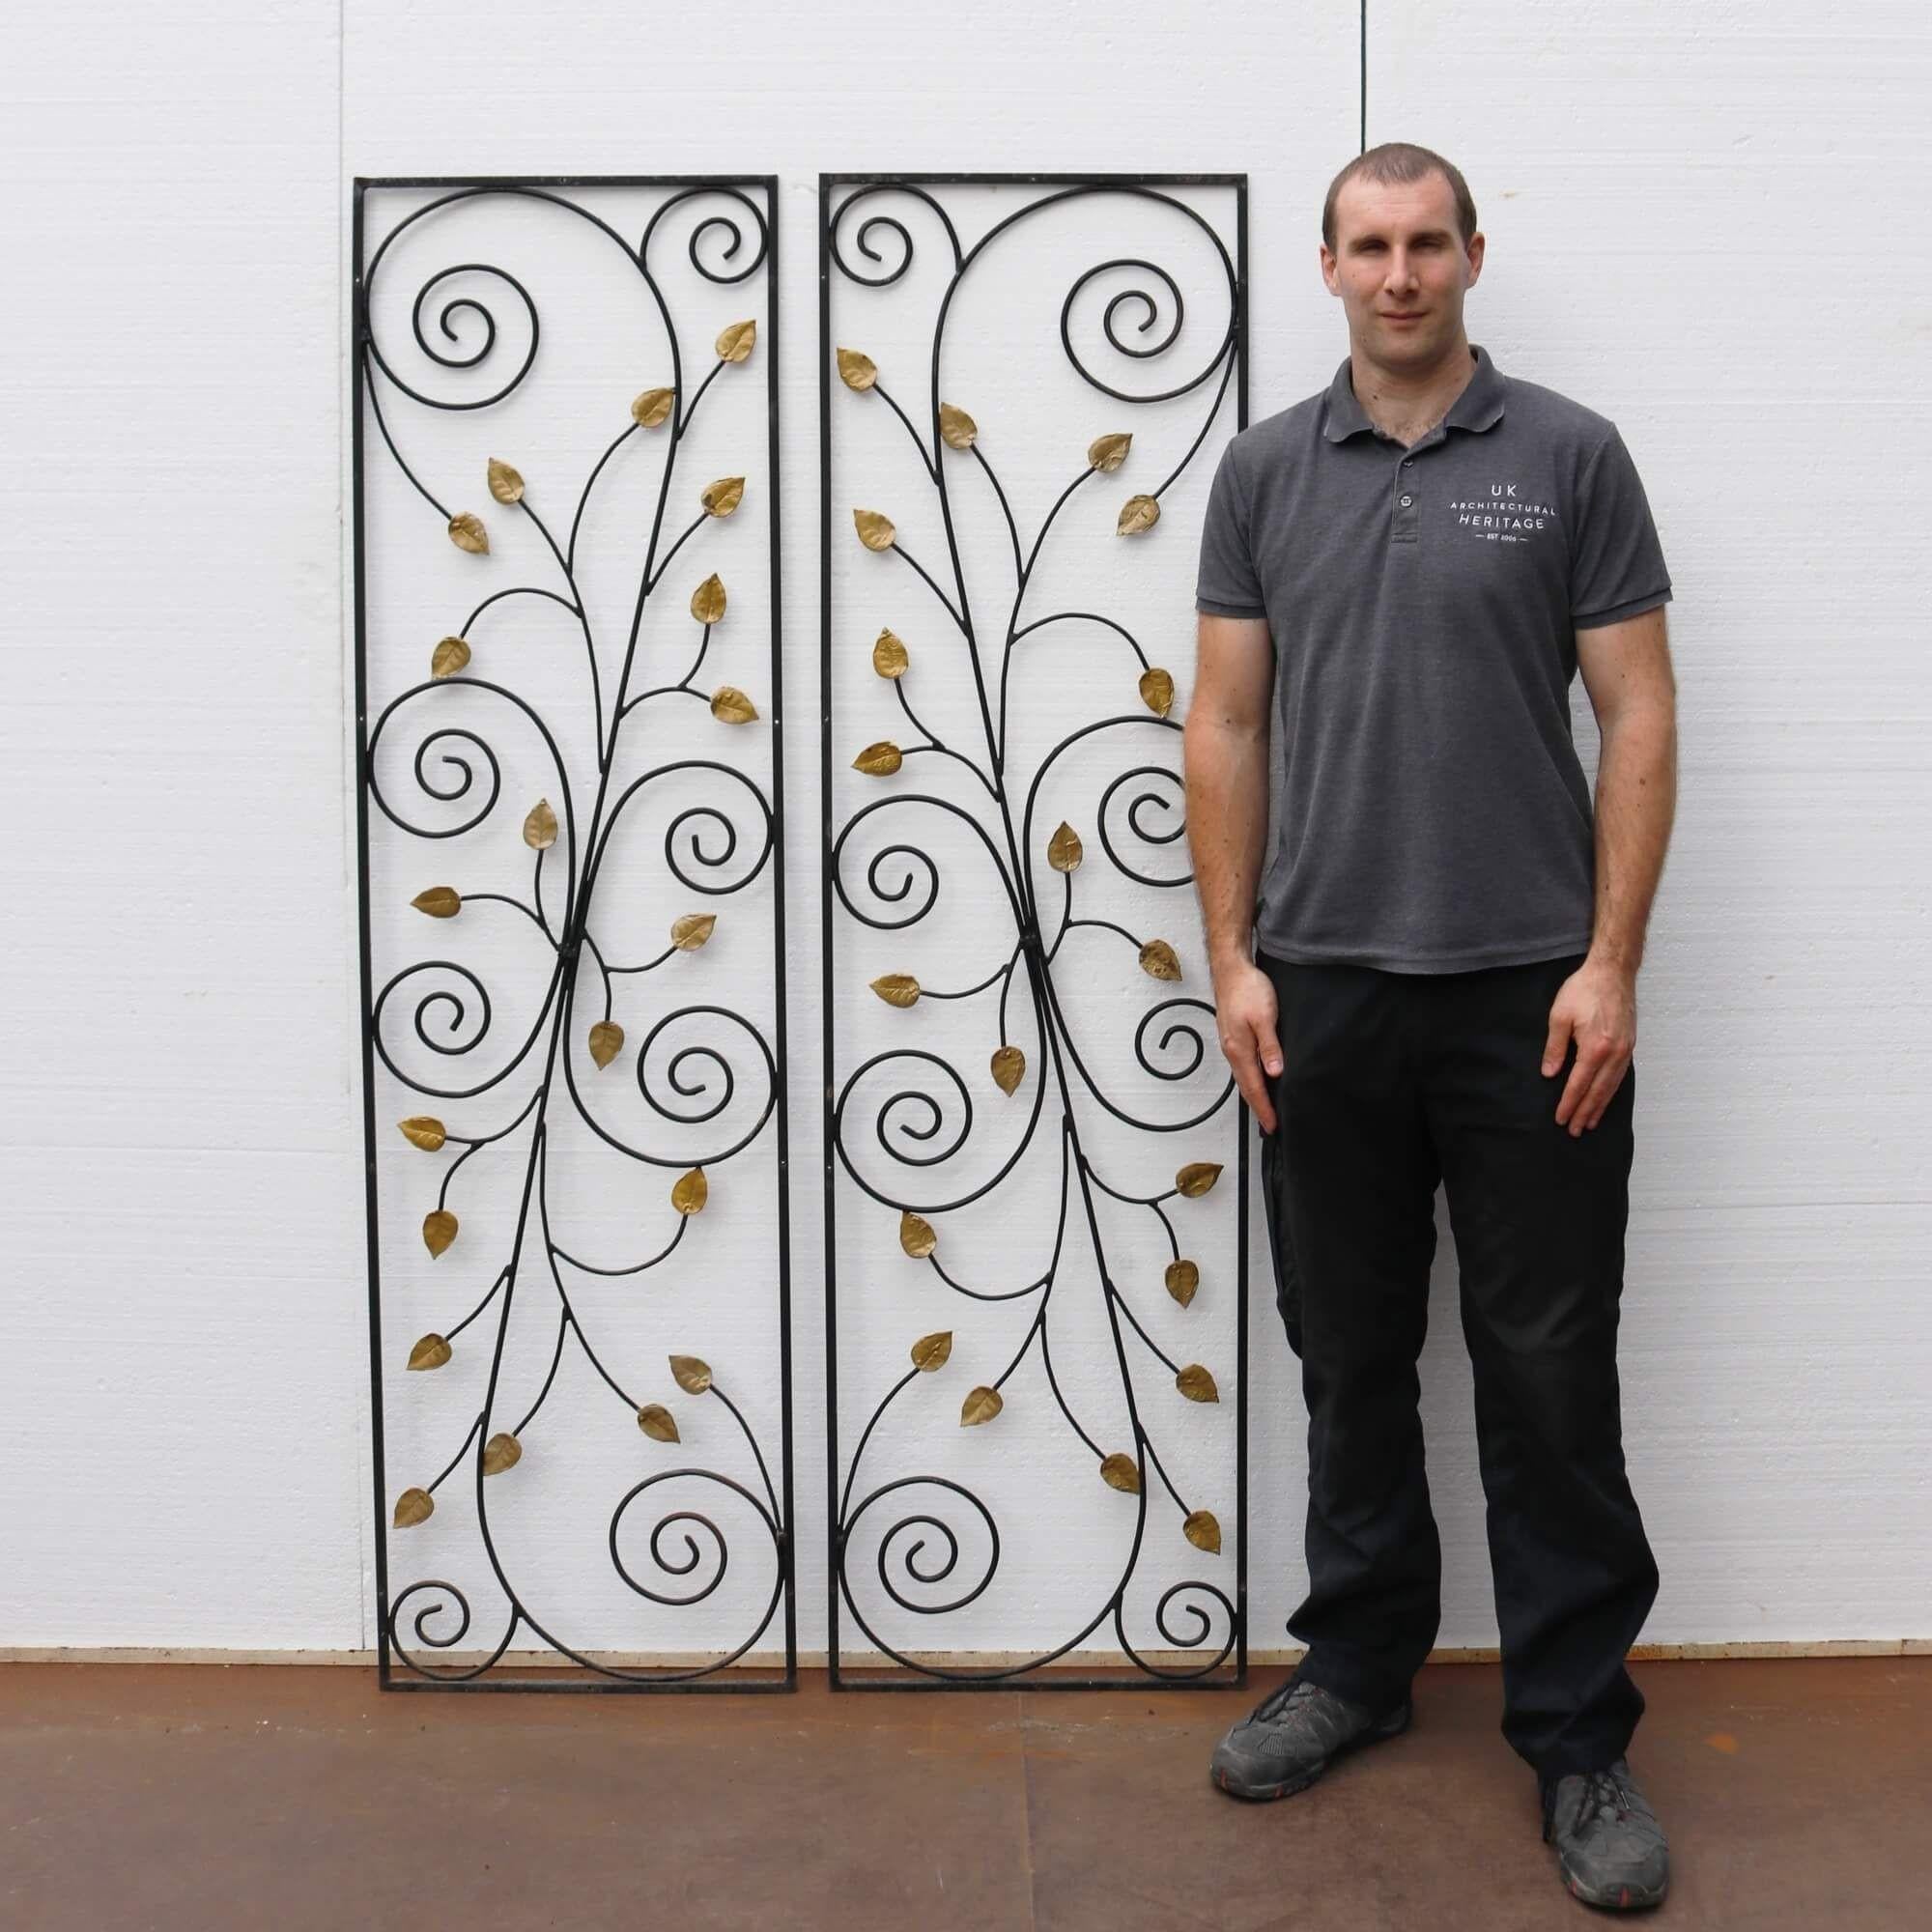 This stunning pair of decorative wrought iron panels date from the 1950s. Made at the hand of a talented blacksmith, each feature gold painted leaves among ornate scrollwork that makes an incredibly beautiful set of panels for a garden or interior.